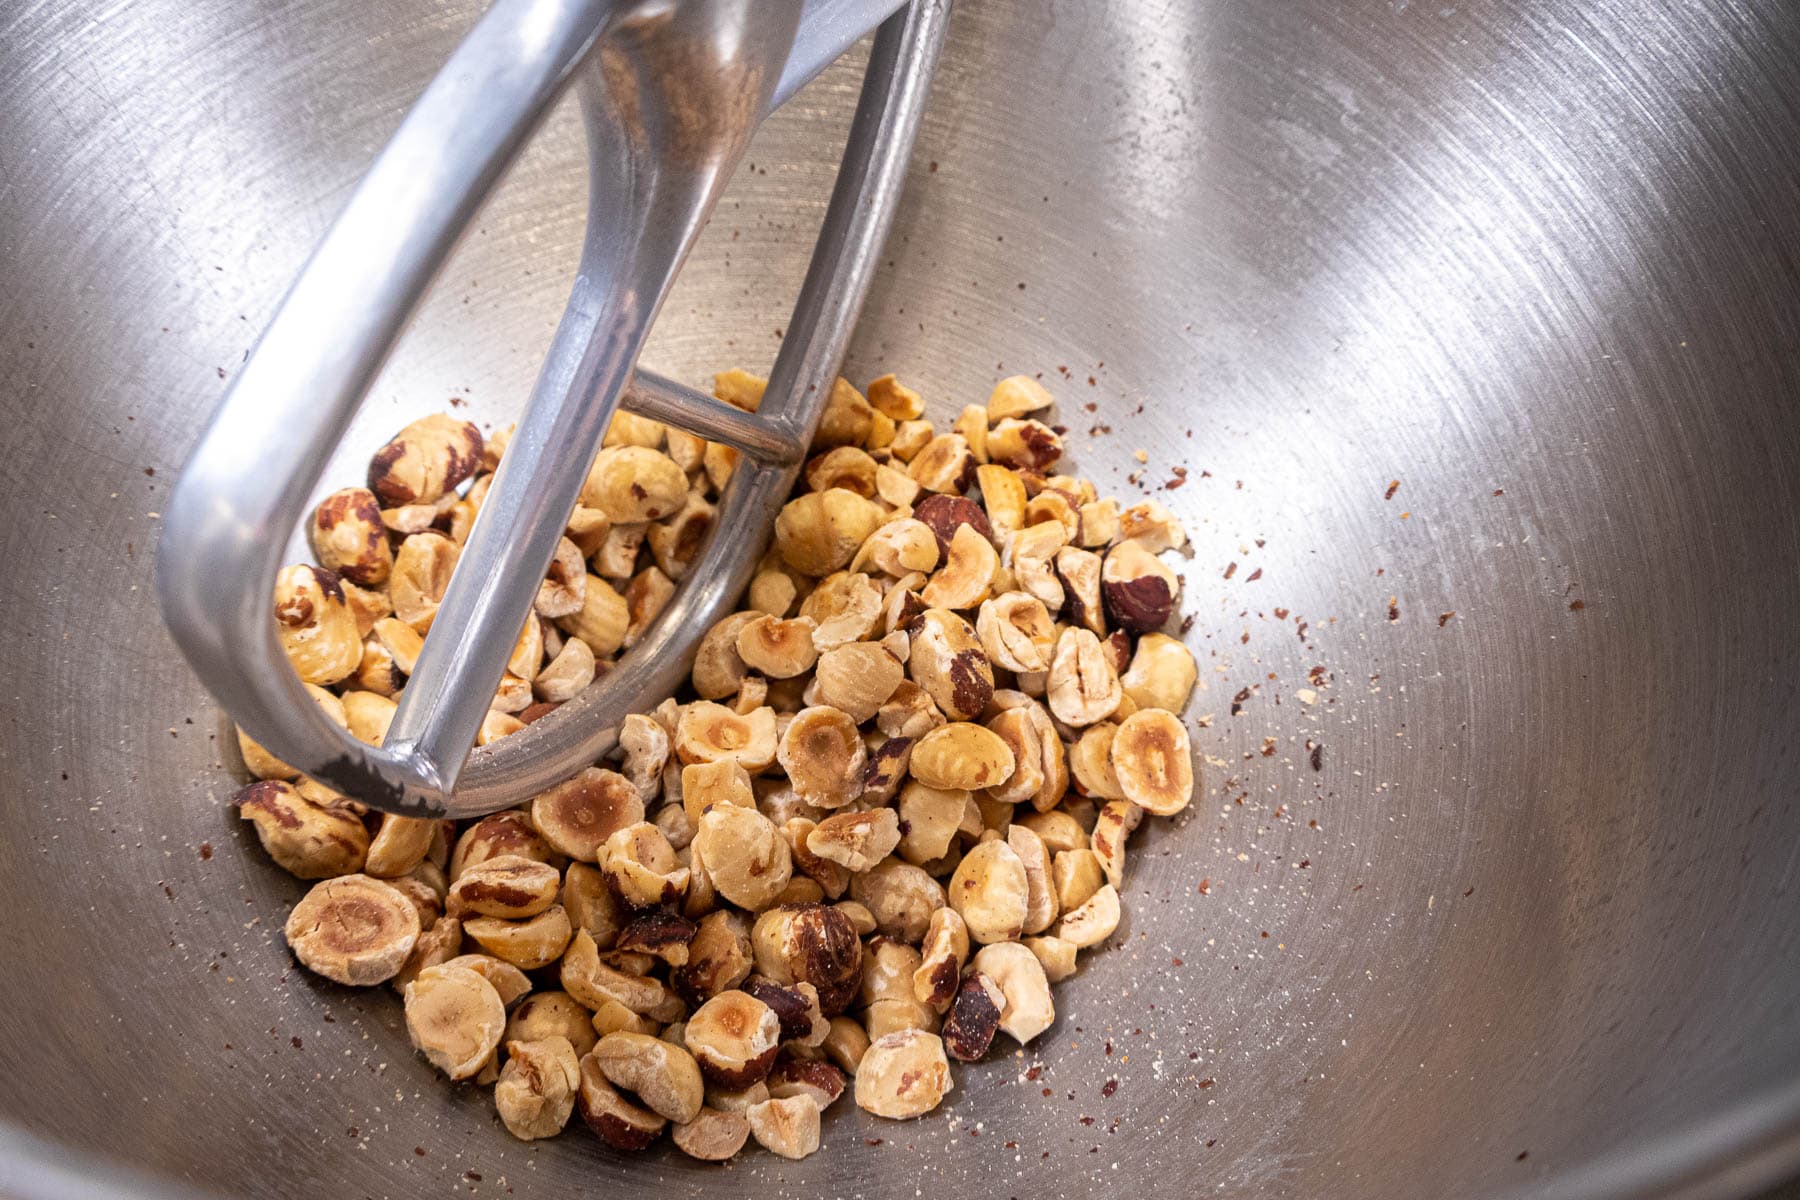 Toasted hazelnut in mixer bowl to be skinned.